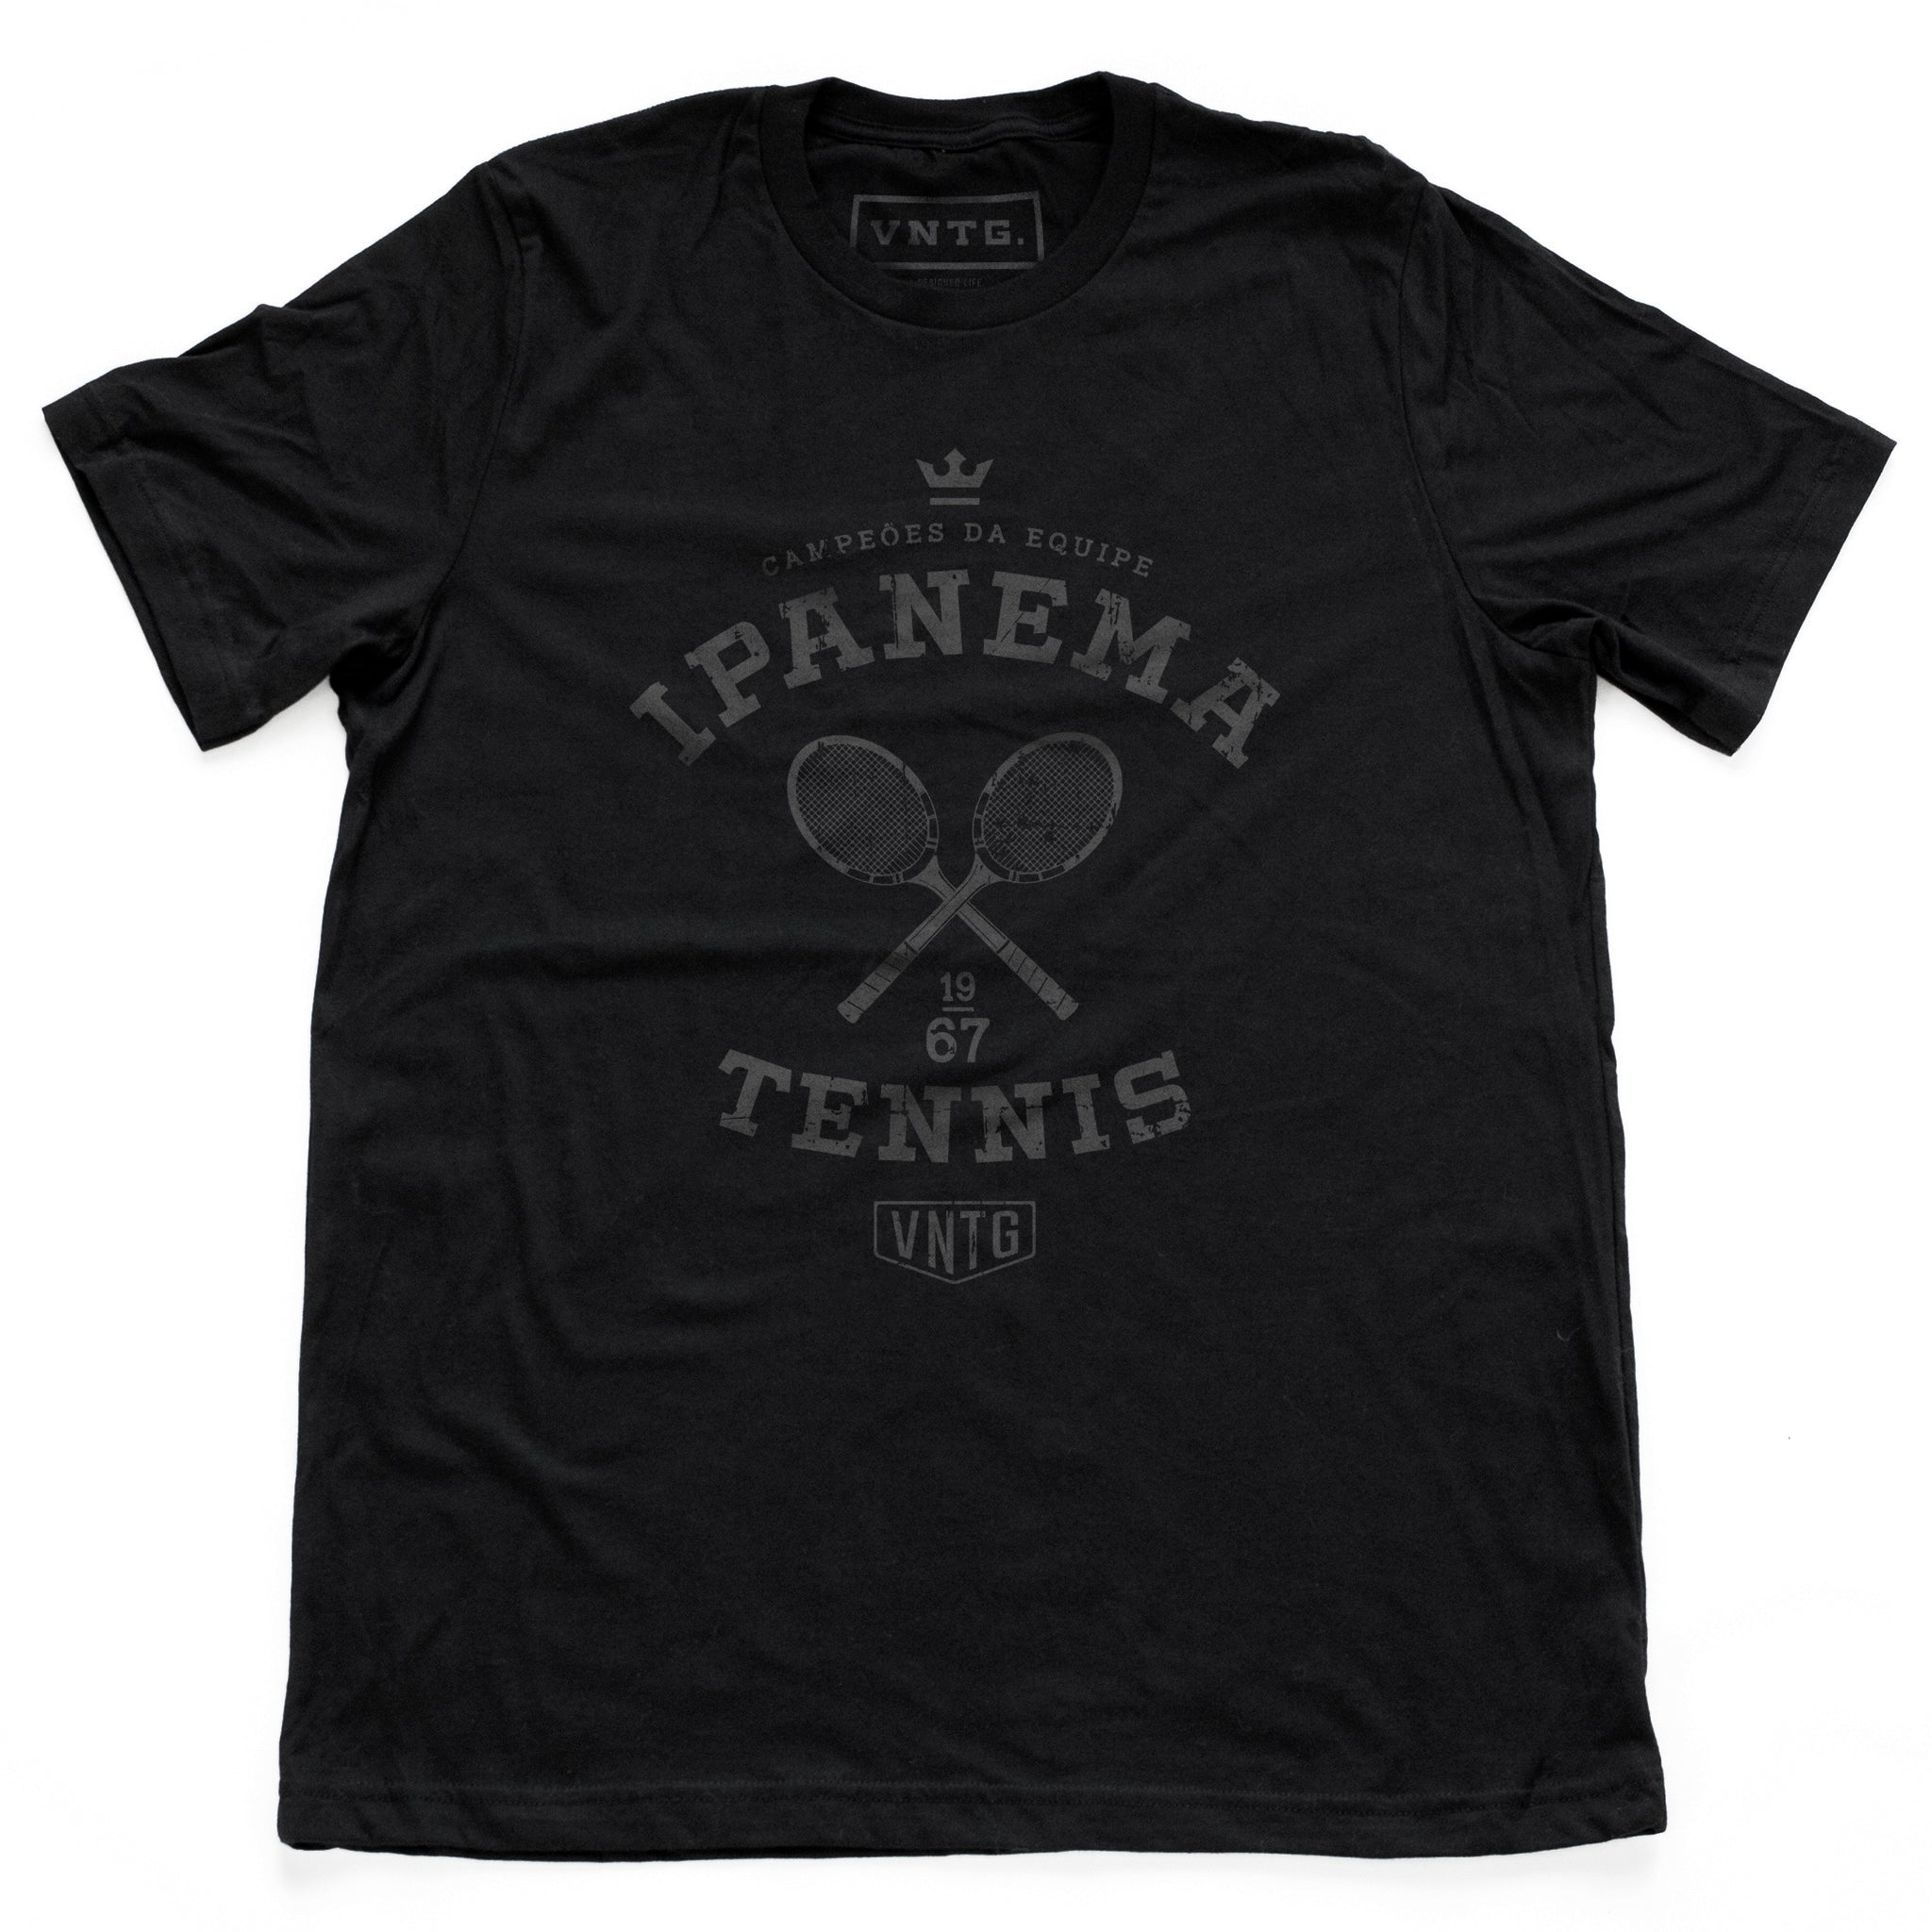 Vintage-inspired, retro graphic sports t-shirt in Black, as a ‘team’ shirt for a fictitious tennis team championship in Ipanema, Rio de Janeiro, Brazil. By fashion brand VNTG., from wolfsaint.net